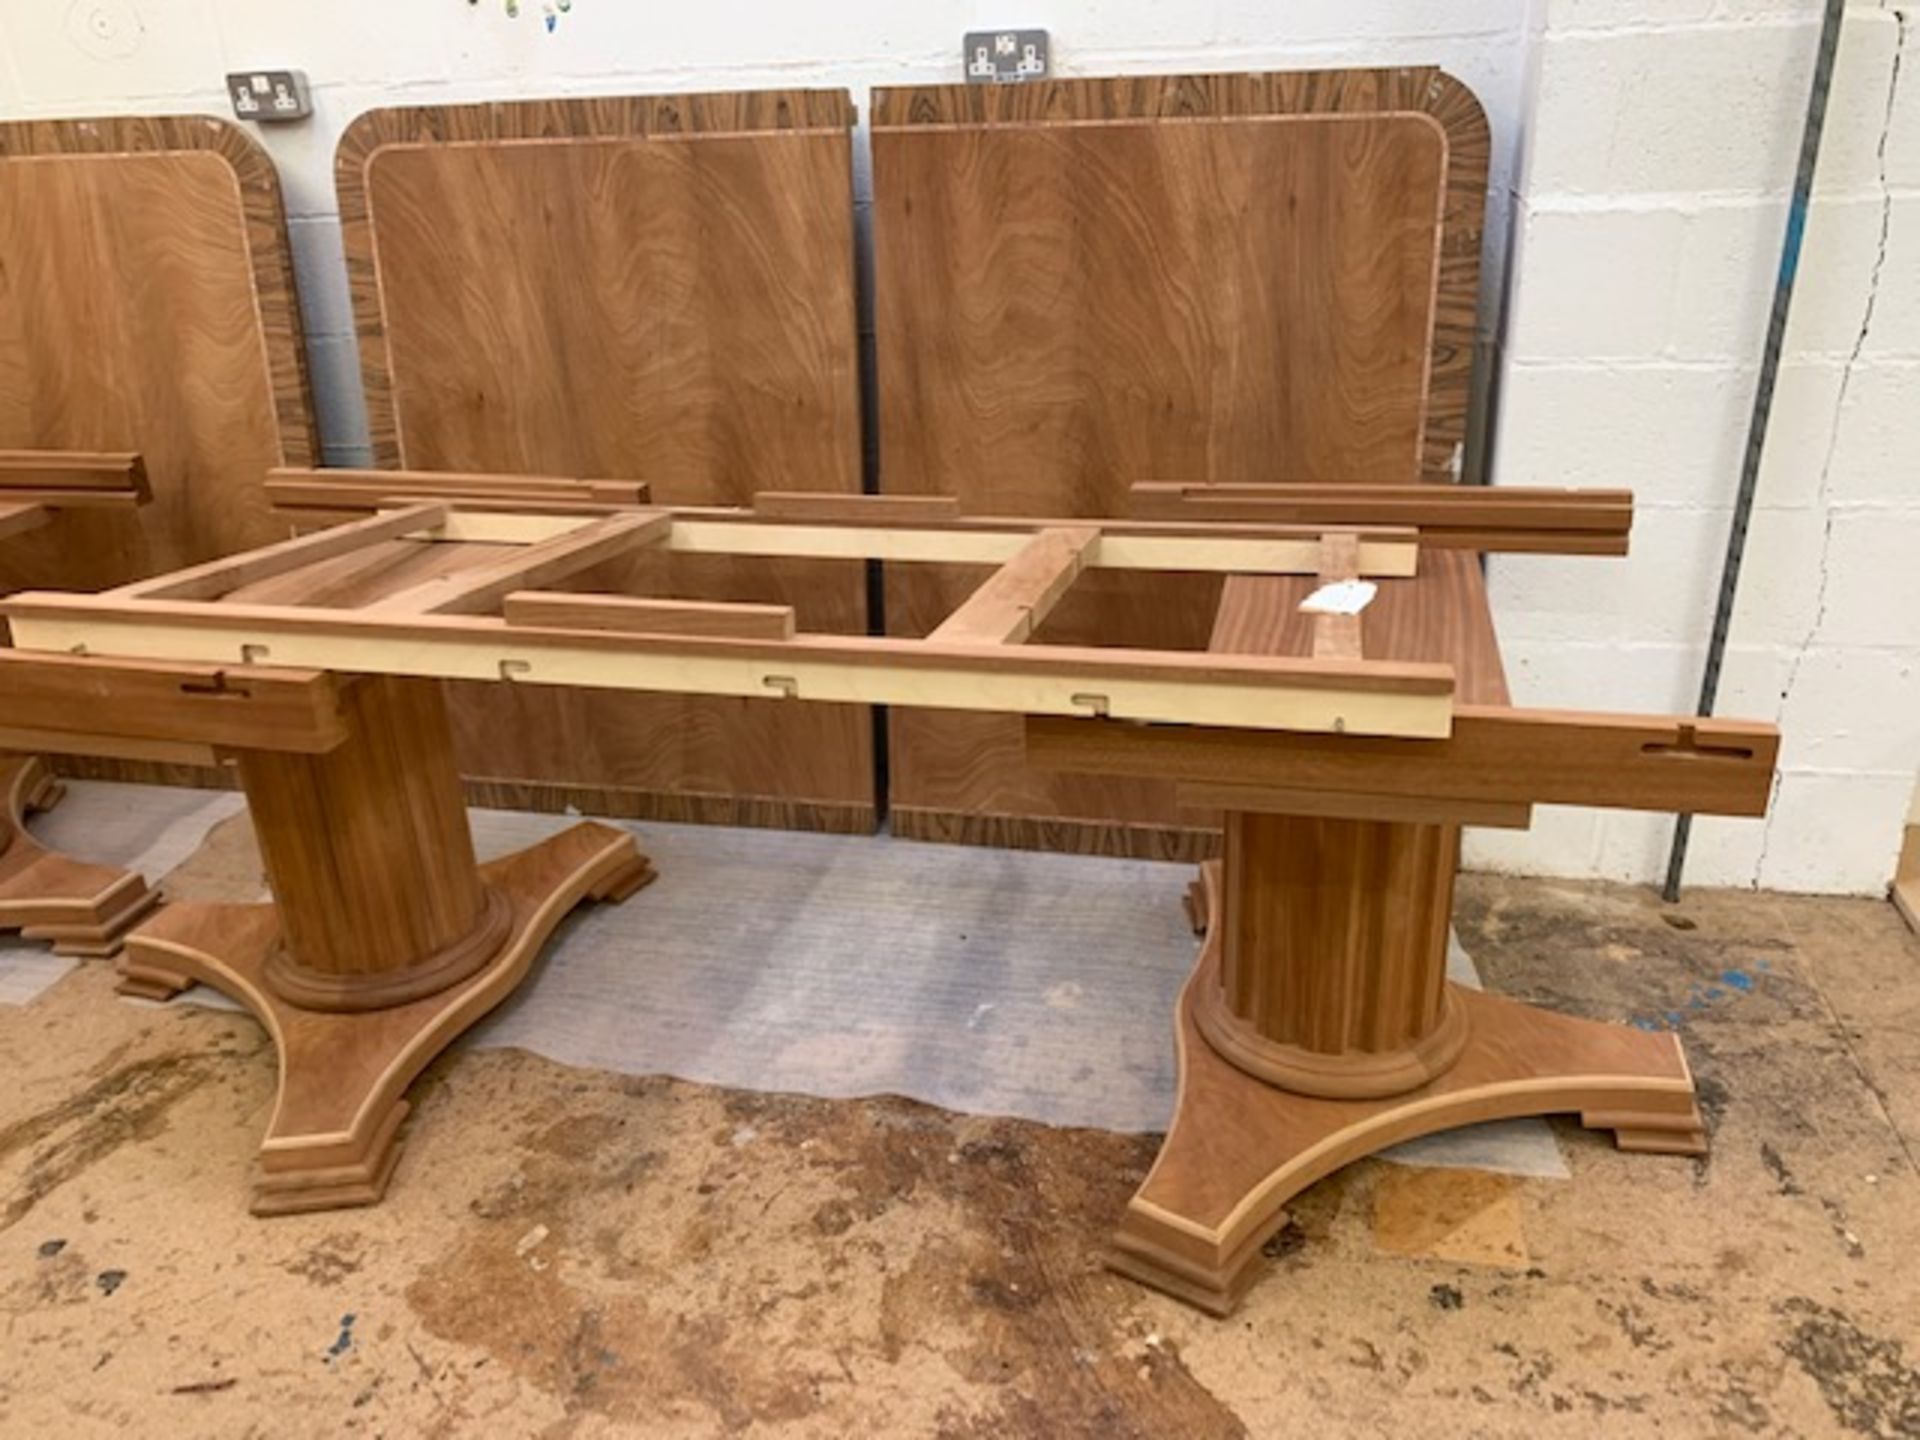 Large Dining Table, from the "Corinthian" Range (requires finishing/polishing)